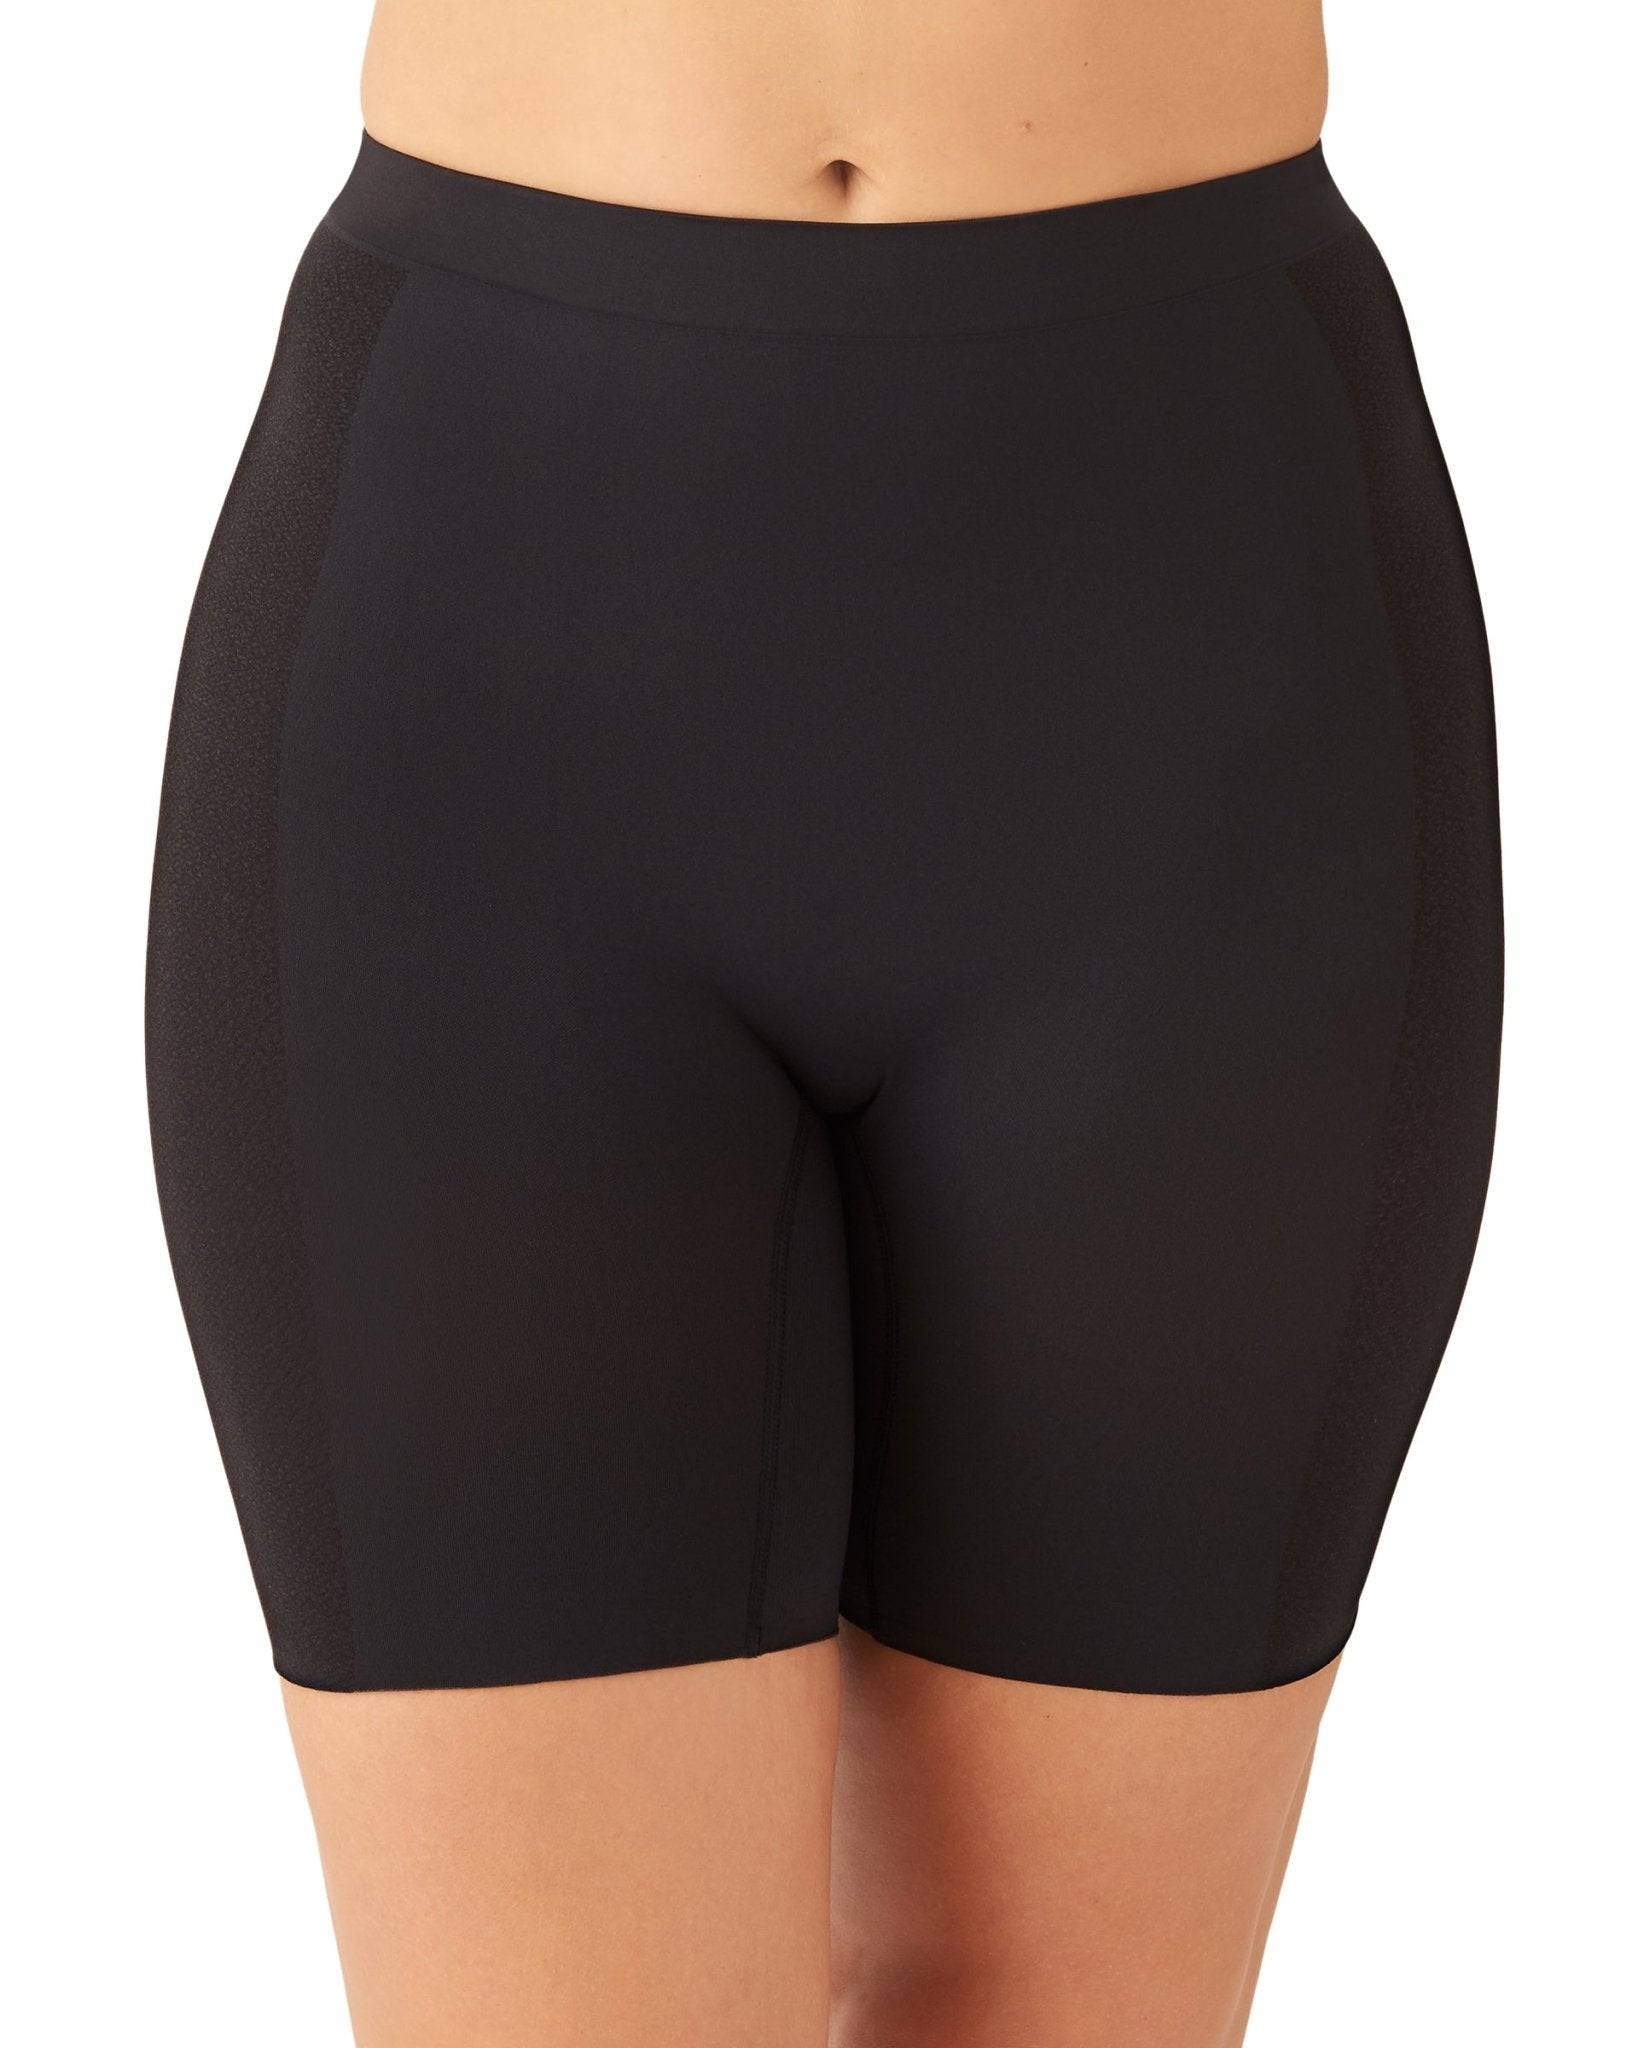 Wacoal Keep Your Cool Thigh Shaper